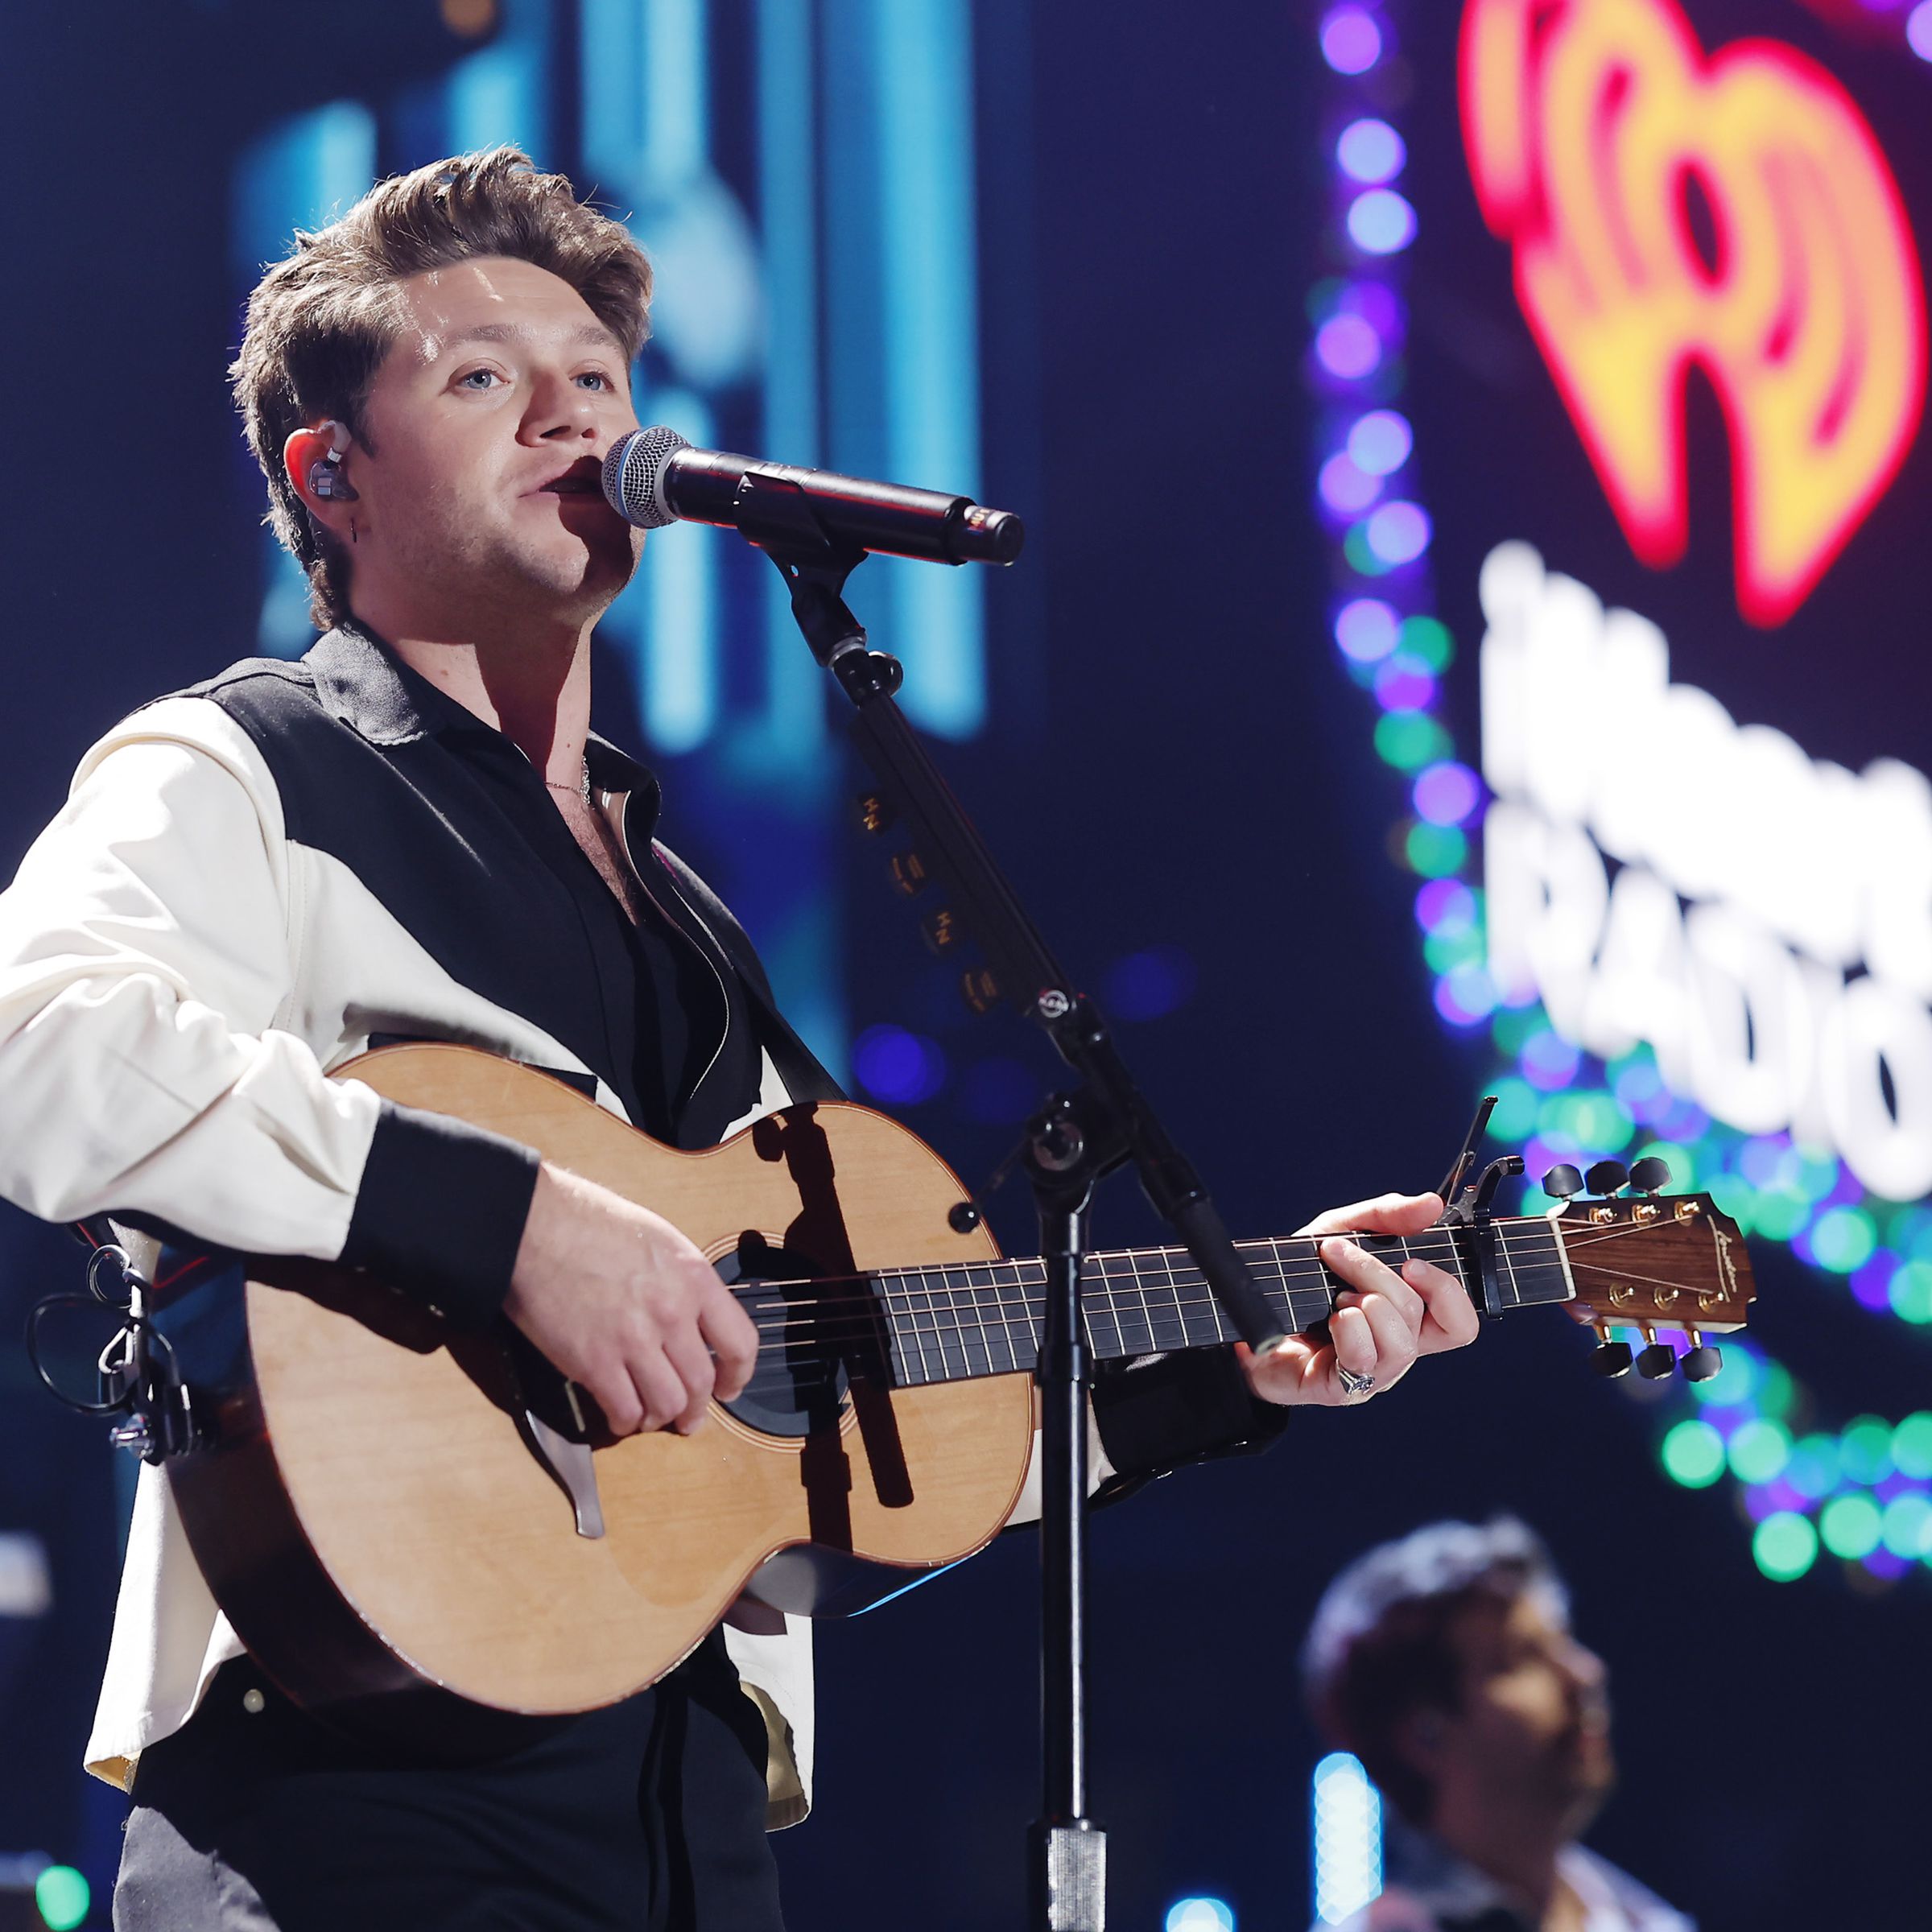 Niall Horan performs onstage at iHeartRadio 102.7 KIIS FM’s Jingle Ball 2023 presented by Capital One at the Kia Forum on December 1st, 2023